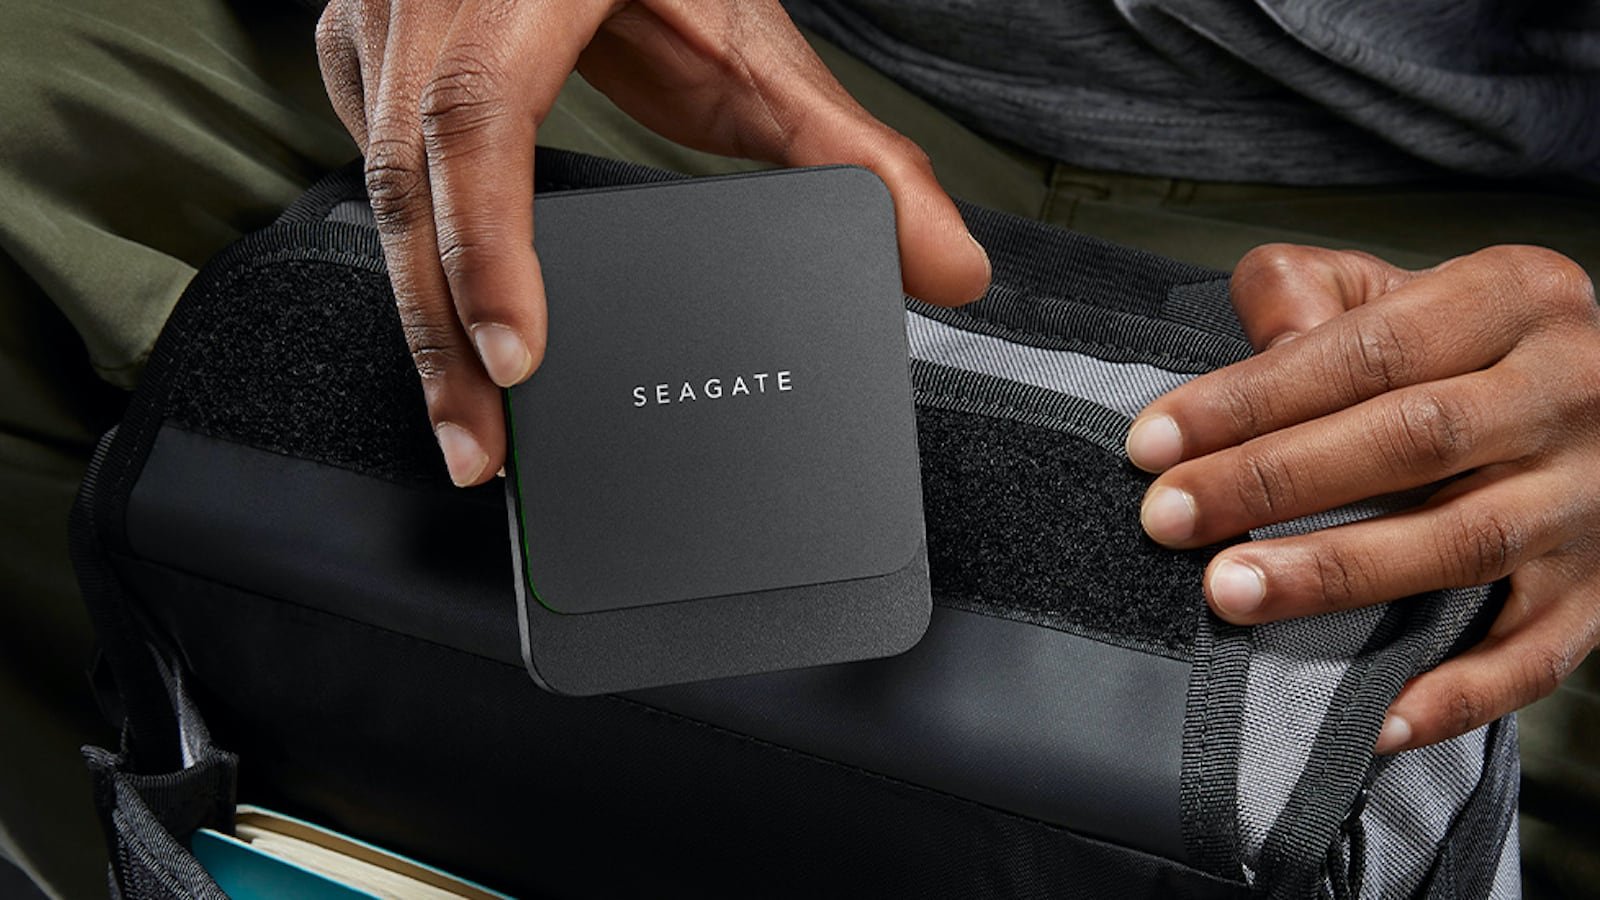 Seagate Barracuda Fast Portable SSD reaches a speed of 540MB/s